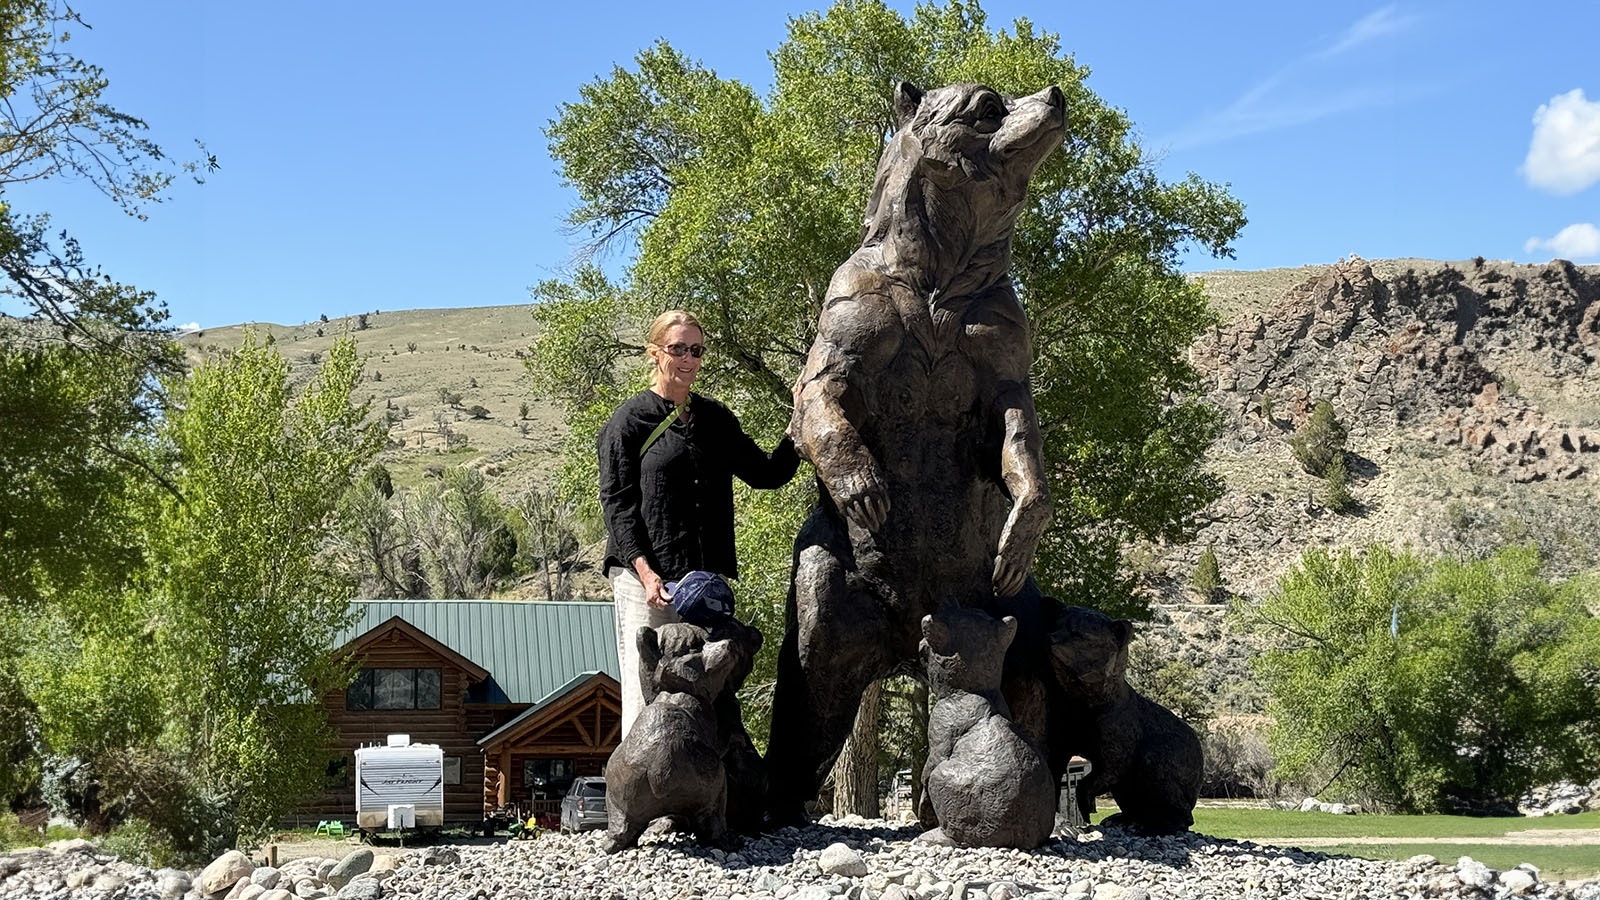 Someone poses next to the bronze sculpture of Grizzly 399. The sculpture was created at Eagle Bronze in Lander.